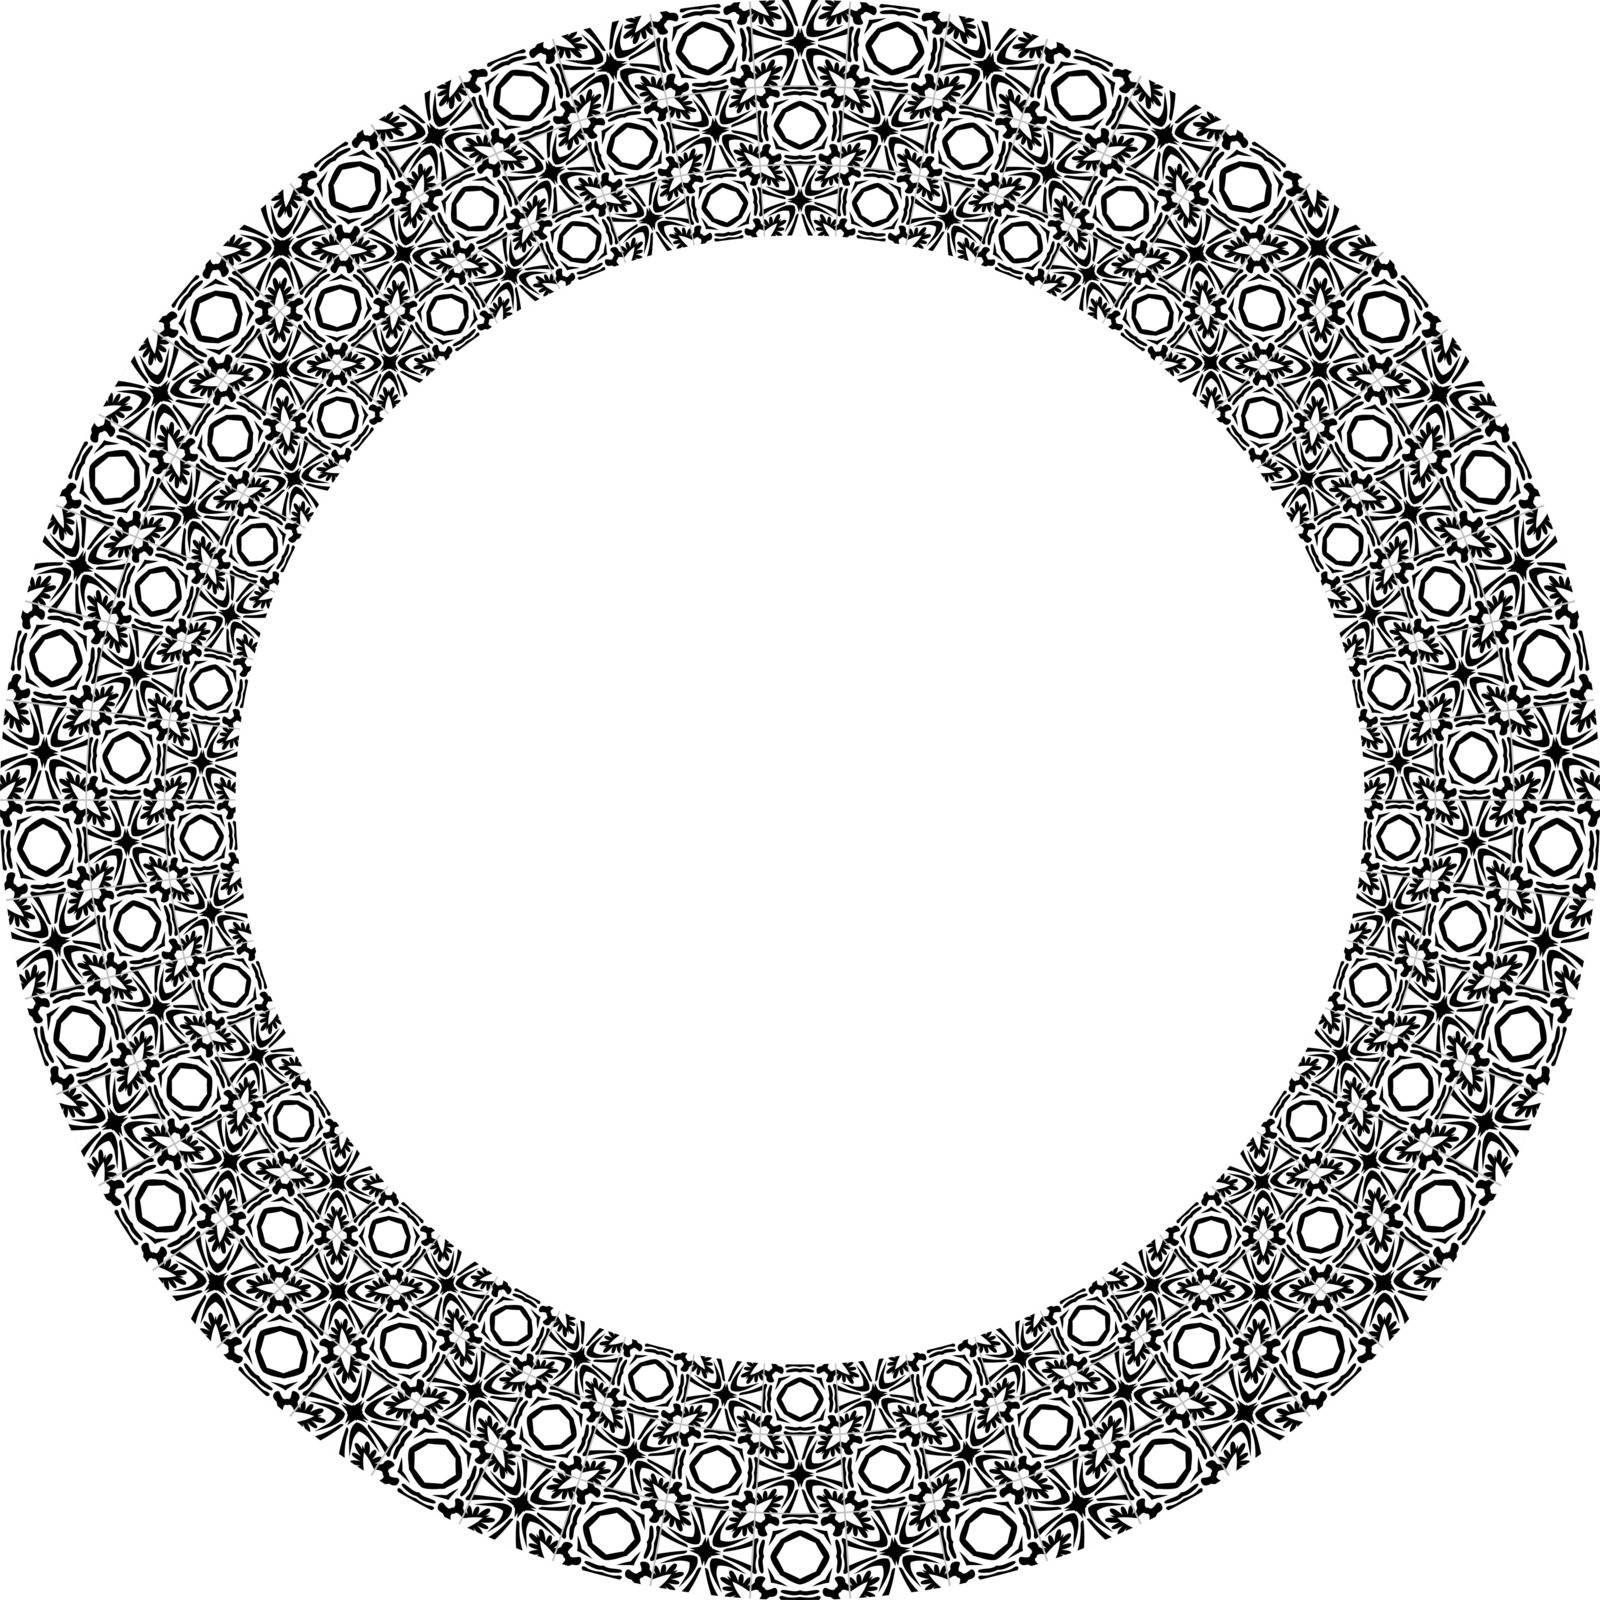 Decorative illustrated circle frame made of portuguese tiles in black and white